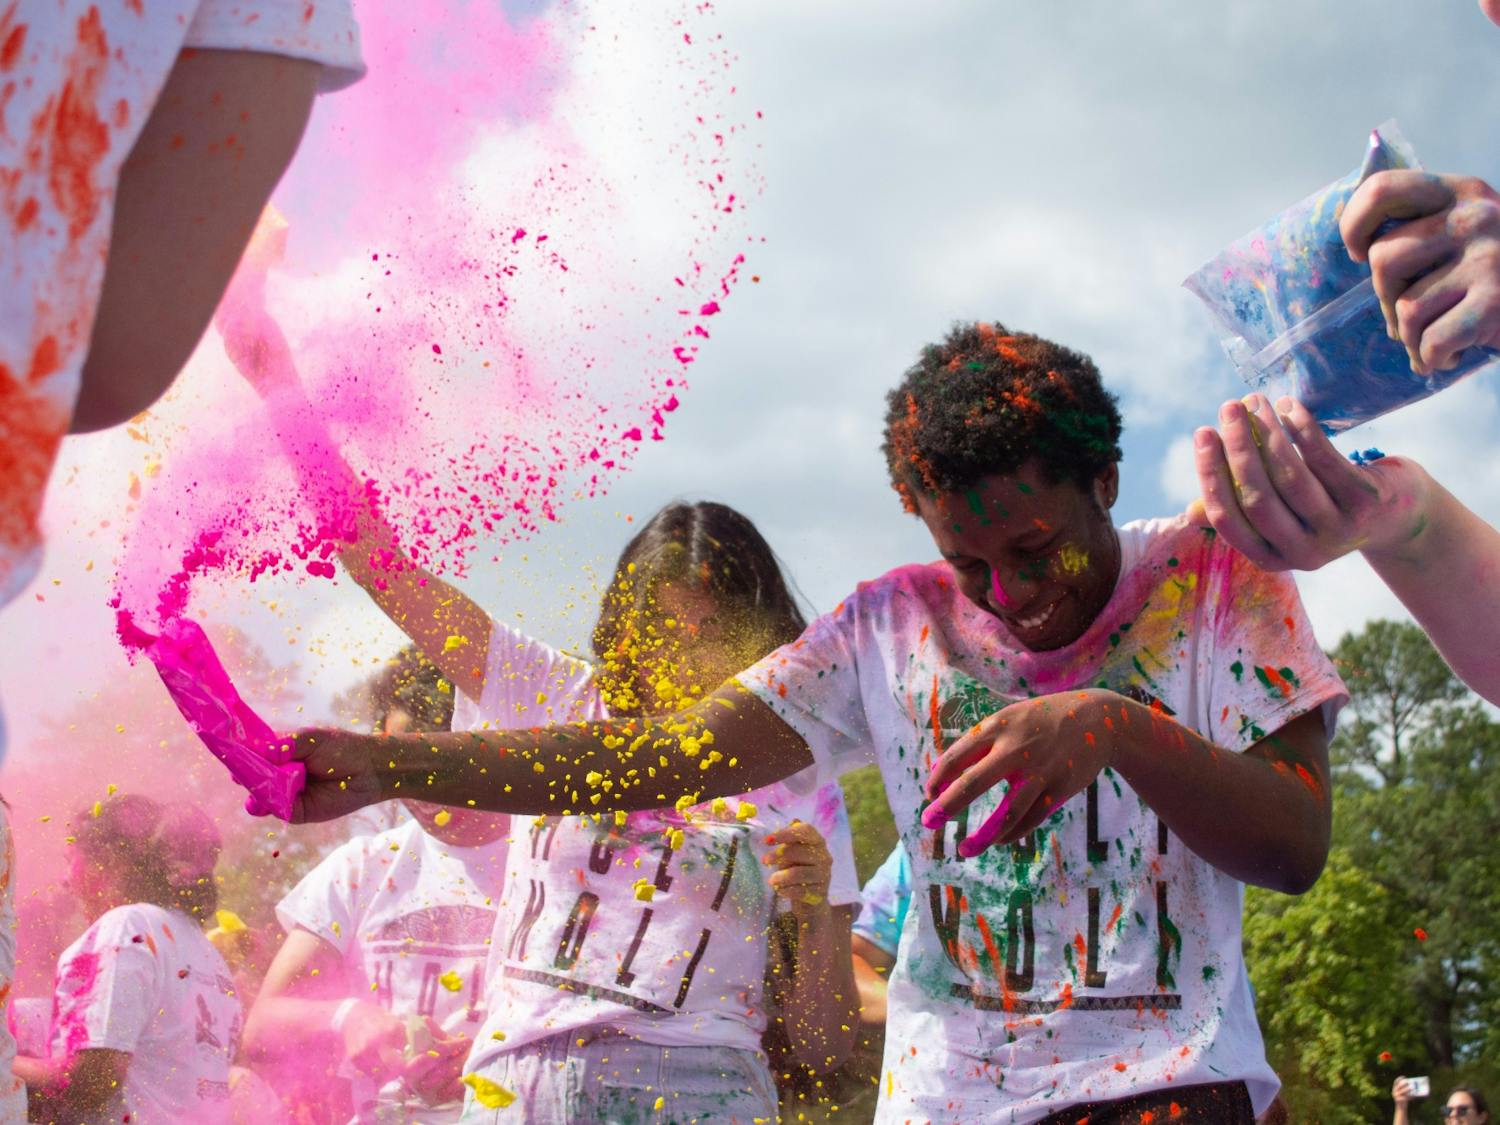 UNC students participate in Holi Moli, an annual event held by students to celebrate Holi, on Saturday, April 23, 2022.